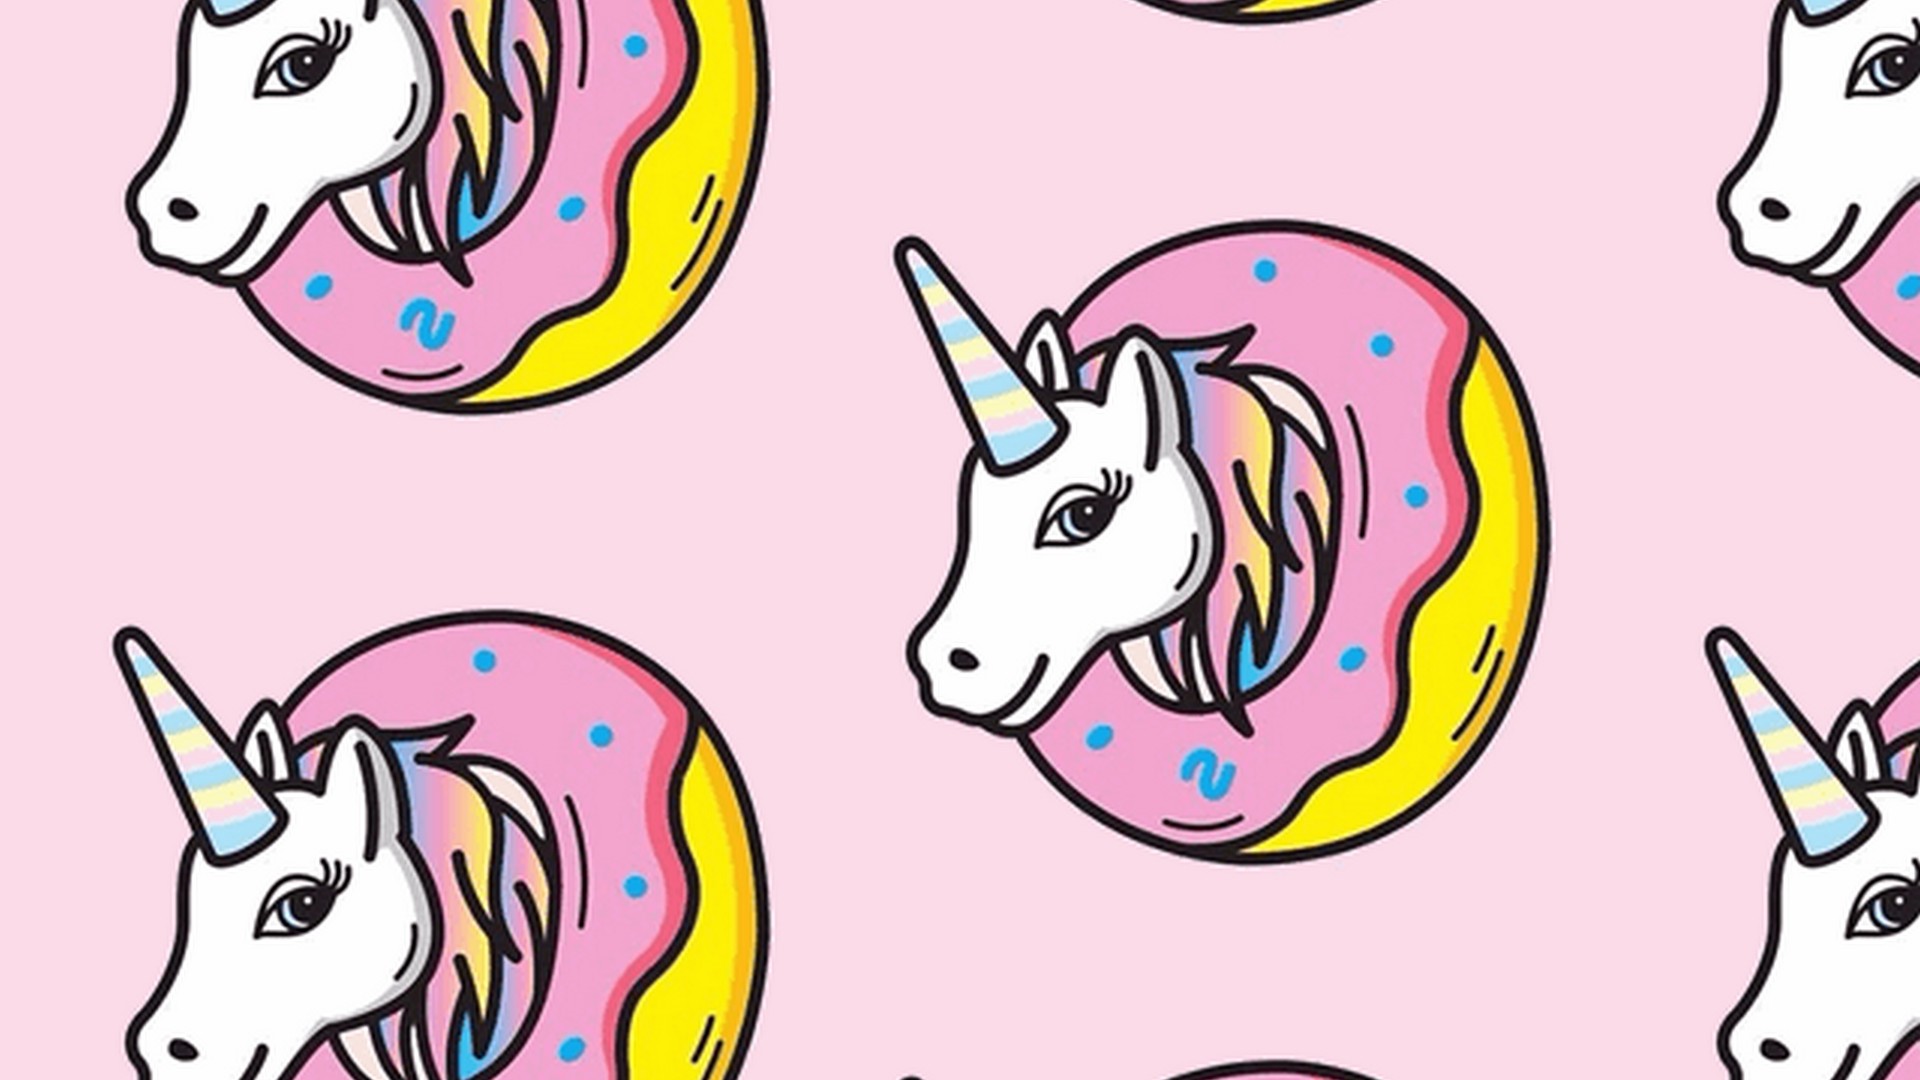 Cute Unicorn Wallpaper For Desktop with high-resolution 1920x1080 pixel. You can use this wallpaper for your Windows and Mac OS computers as well as your Android and iPhone smartphones